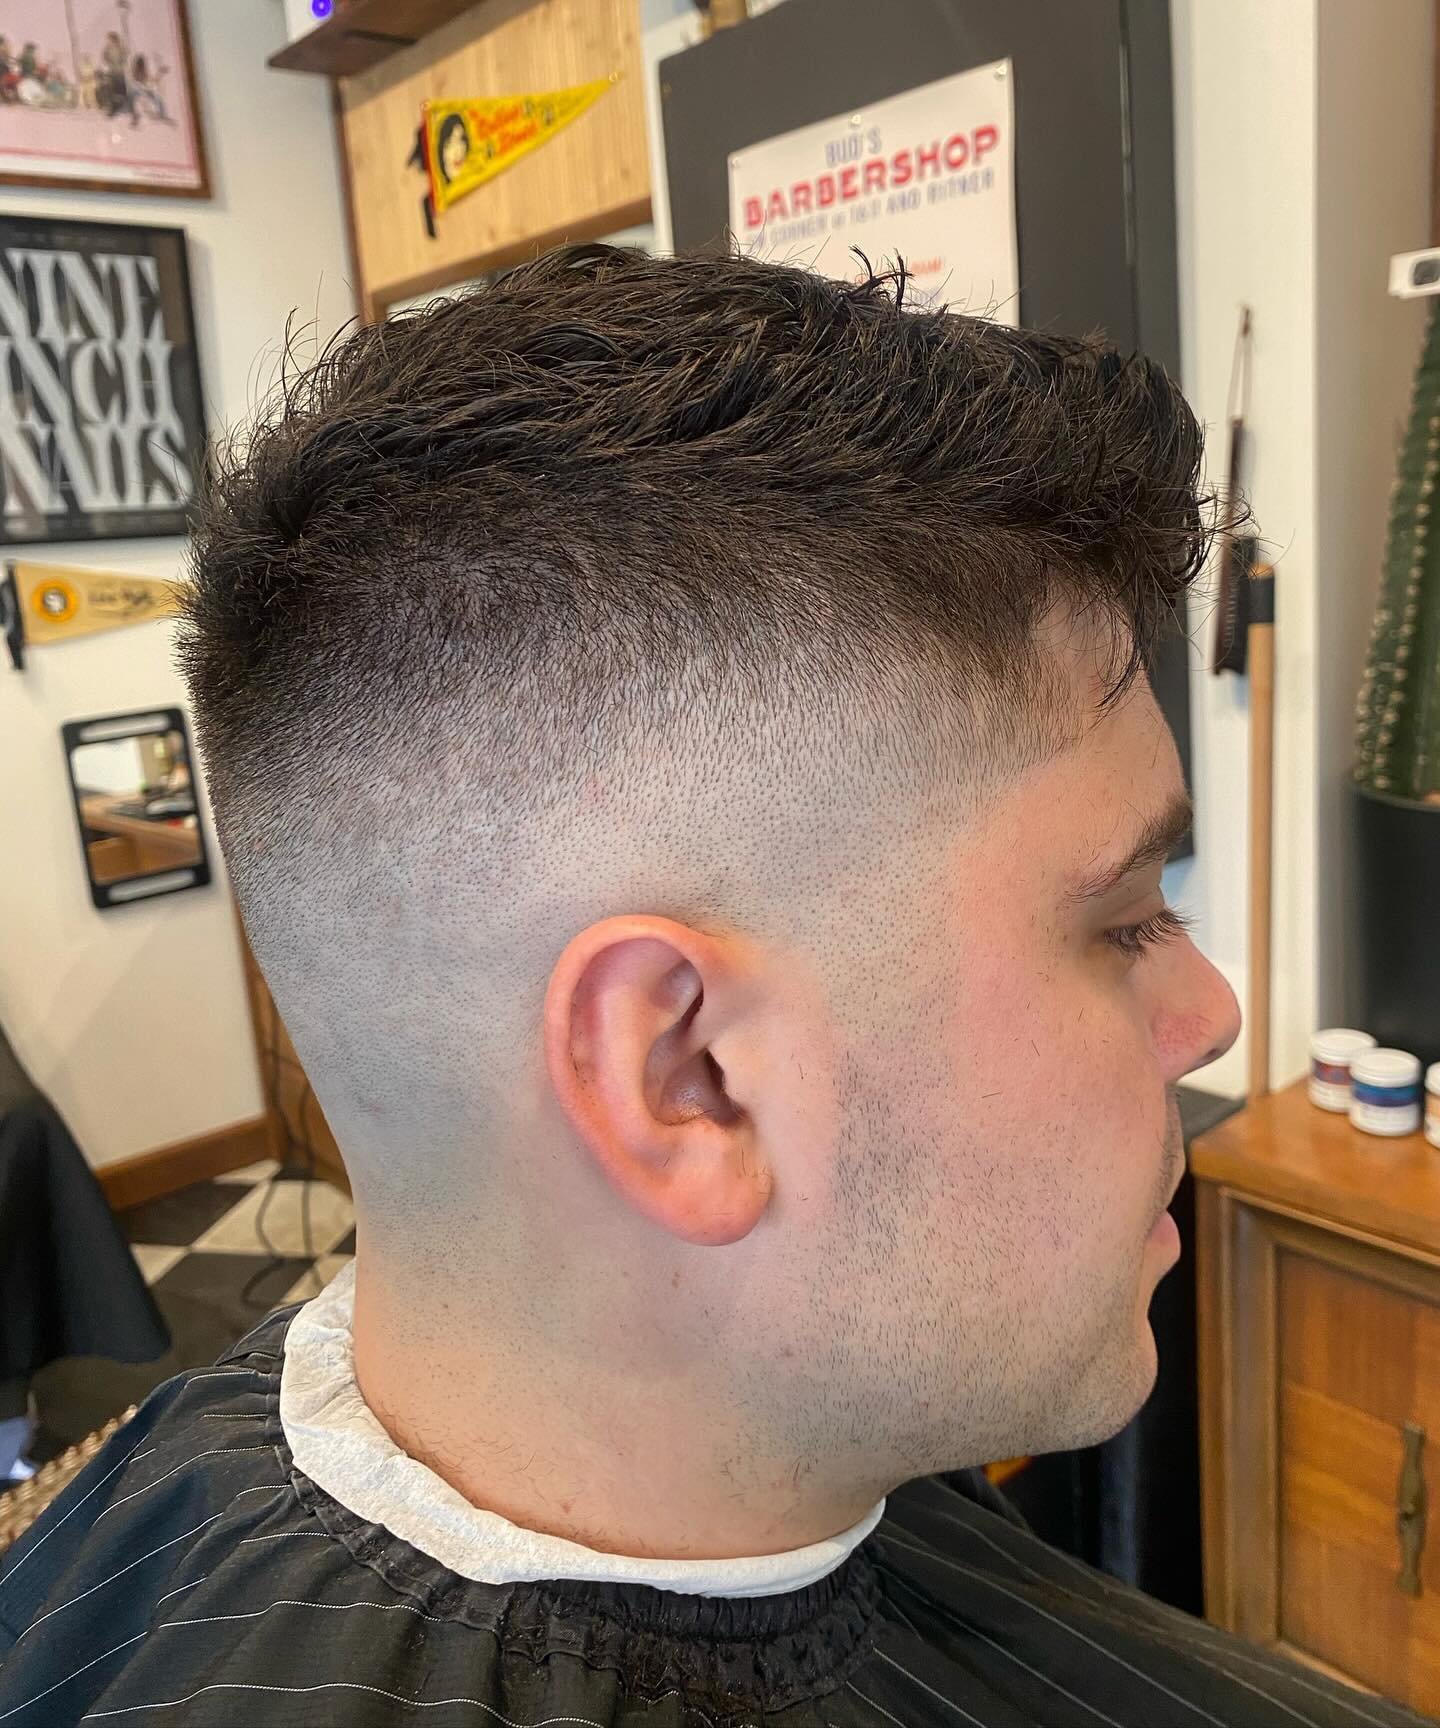 High Skin Fade by Hank. Book with him at the link in our bio!

#PhillyBarber #PhillyBarbers #PhillyBarberShop #PhillyBarbershops #SouthPhilly #💈